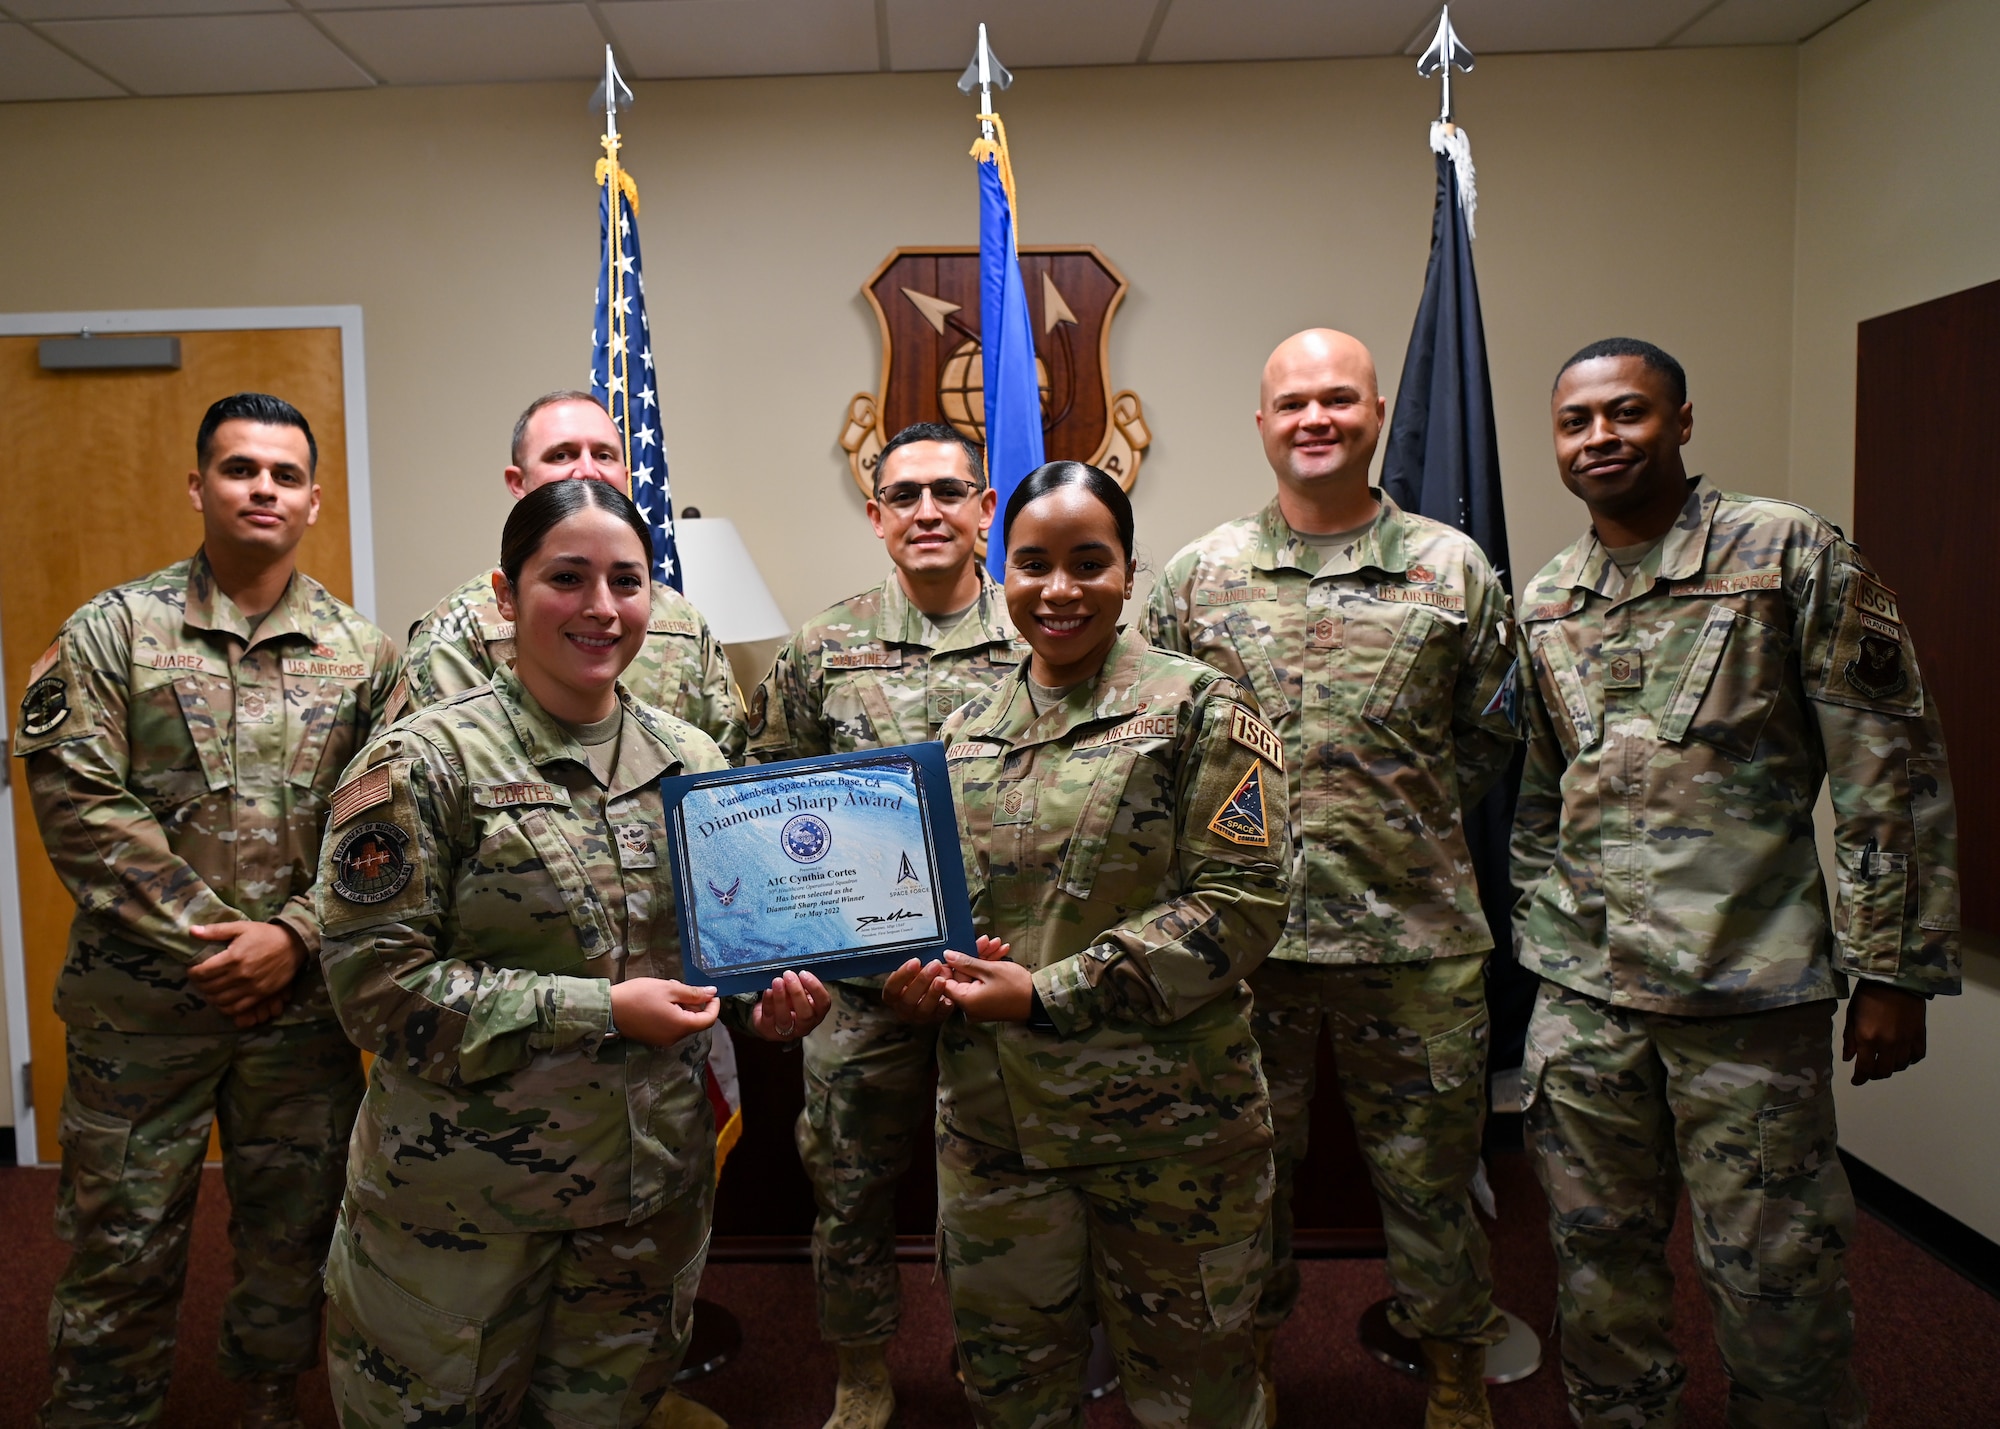 Master Sgt. Ashley J. Carter, 30th Medical Group first sergeant (center), presents the Diamond Sharp Award to Airman 1st Class Cinthia Cortes (left), 30th Medical Group aerospace medical technician at Vandenberg Space Force Base, Calif., June 14, 2022. The Diamond Sharp Award is given to and recognizes exemplary Airmen and Guardians who go above and beyond in their daily lives. Cortes received the award for her quick action heroic efforts to help save an injured motorcyclist’s life while exiting Highway 101 in Santa Maria, Calif. (U.S. Space Force photo by Airman 1st Class Tiarra Sibley)